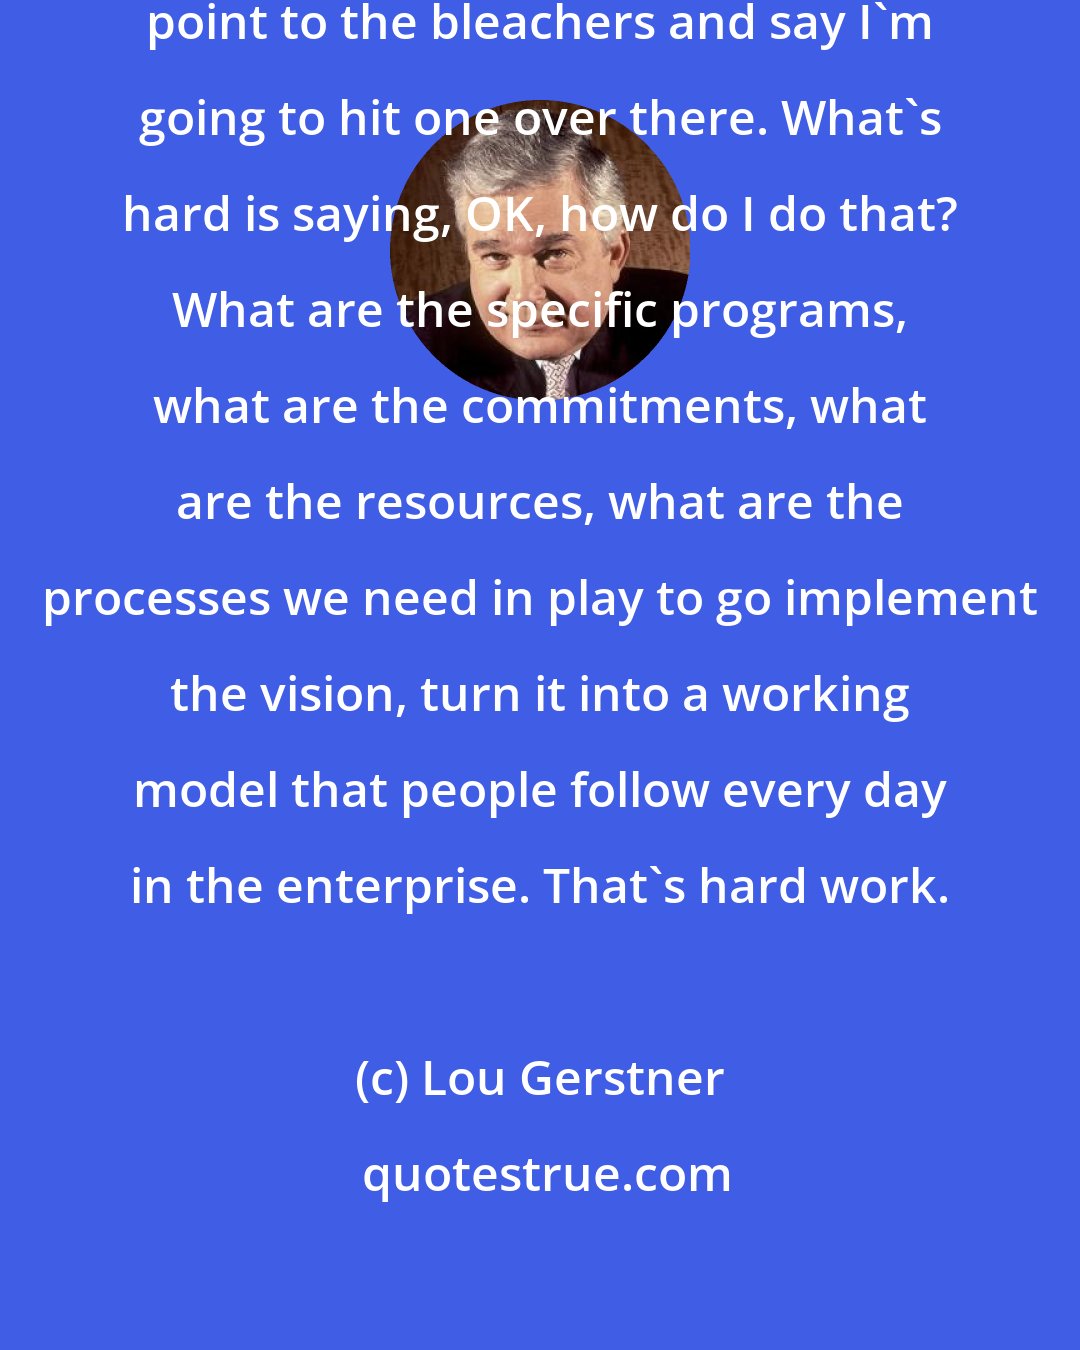 Lou Gerstner: Vision is easy. It's so easy to just point to the bleachers and say I'm going to hit one over there. What's hard is saying, OK, how do I do that? What are the specific programs, what are the commitments, what are the resources, what are the processes we need in play to go implement the vision, turn it into a working model that people follow every day in the enterprise. That's hard work.